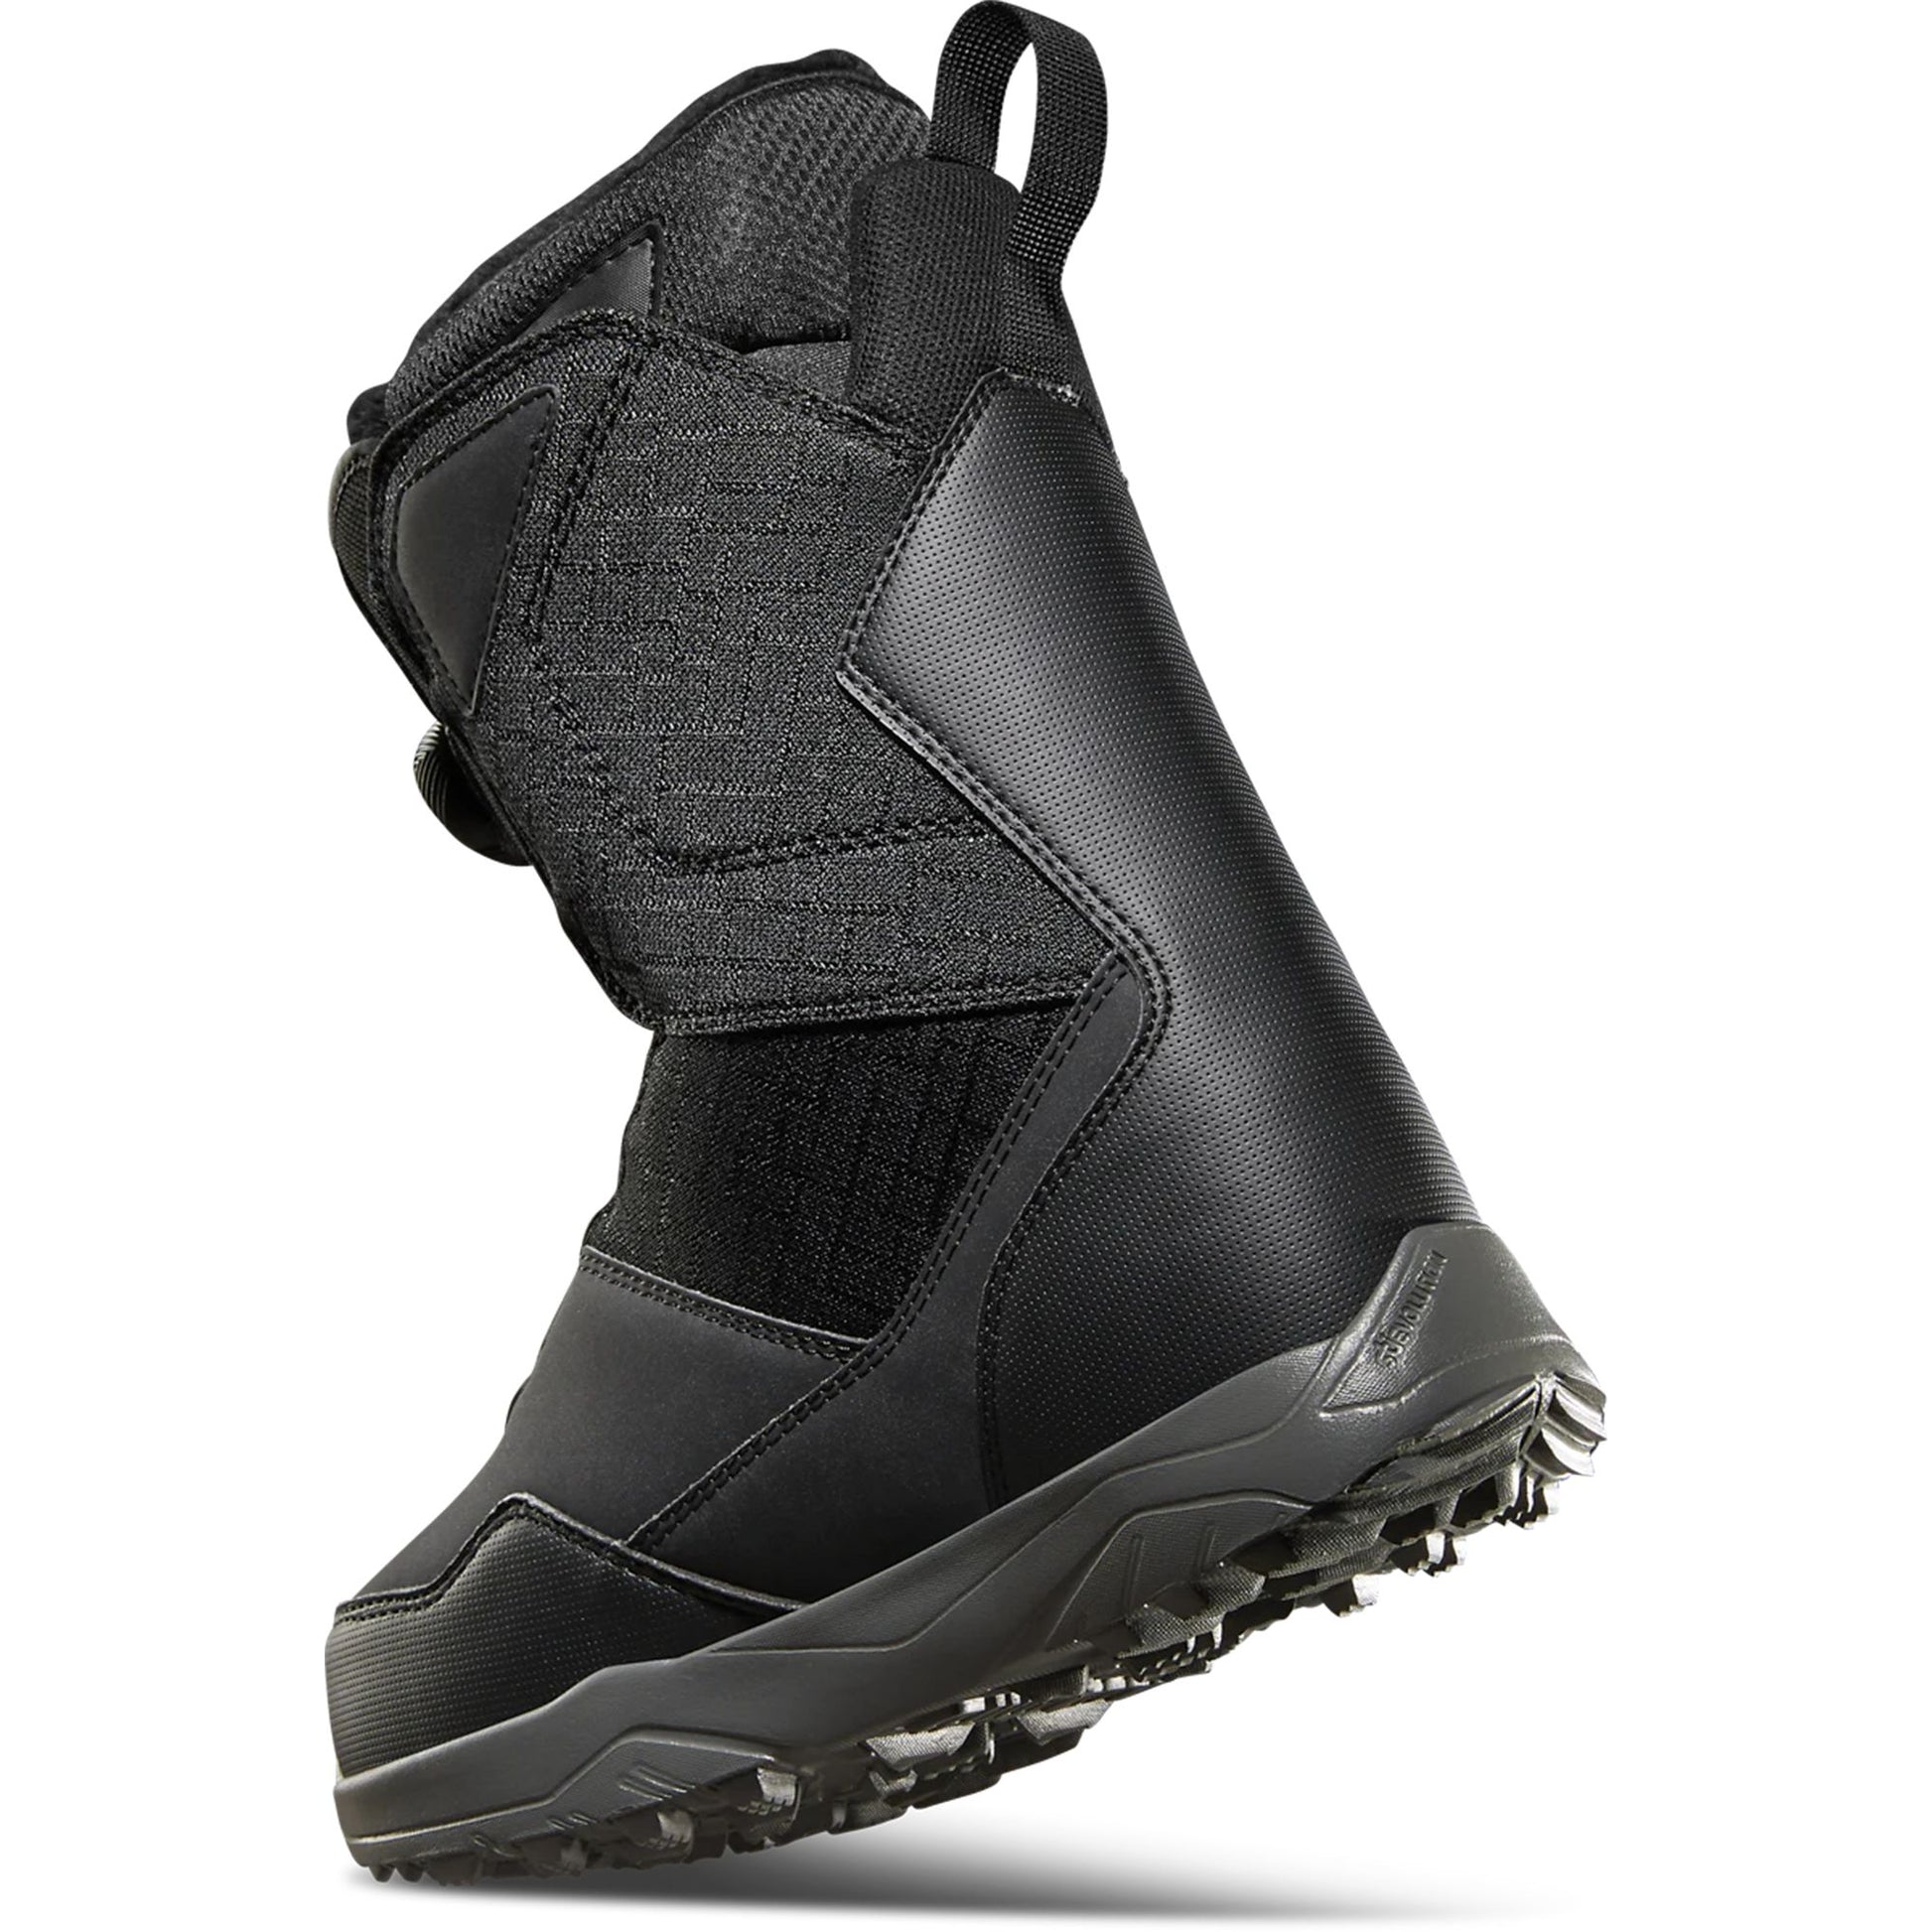 ThirtyTwo Women's Shifty BOA Snowboard Boots Black Snowboard Boots